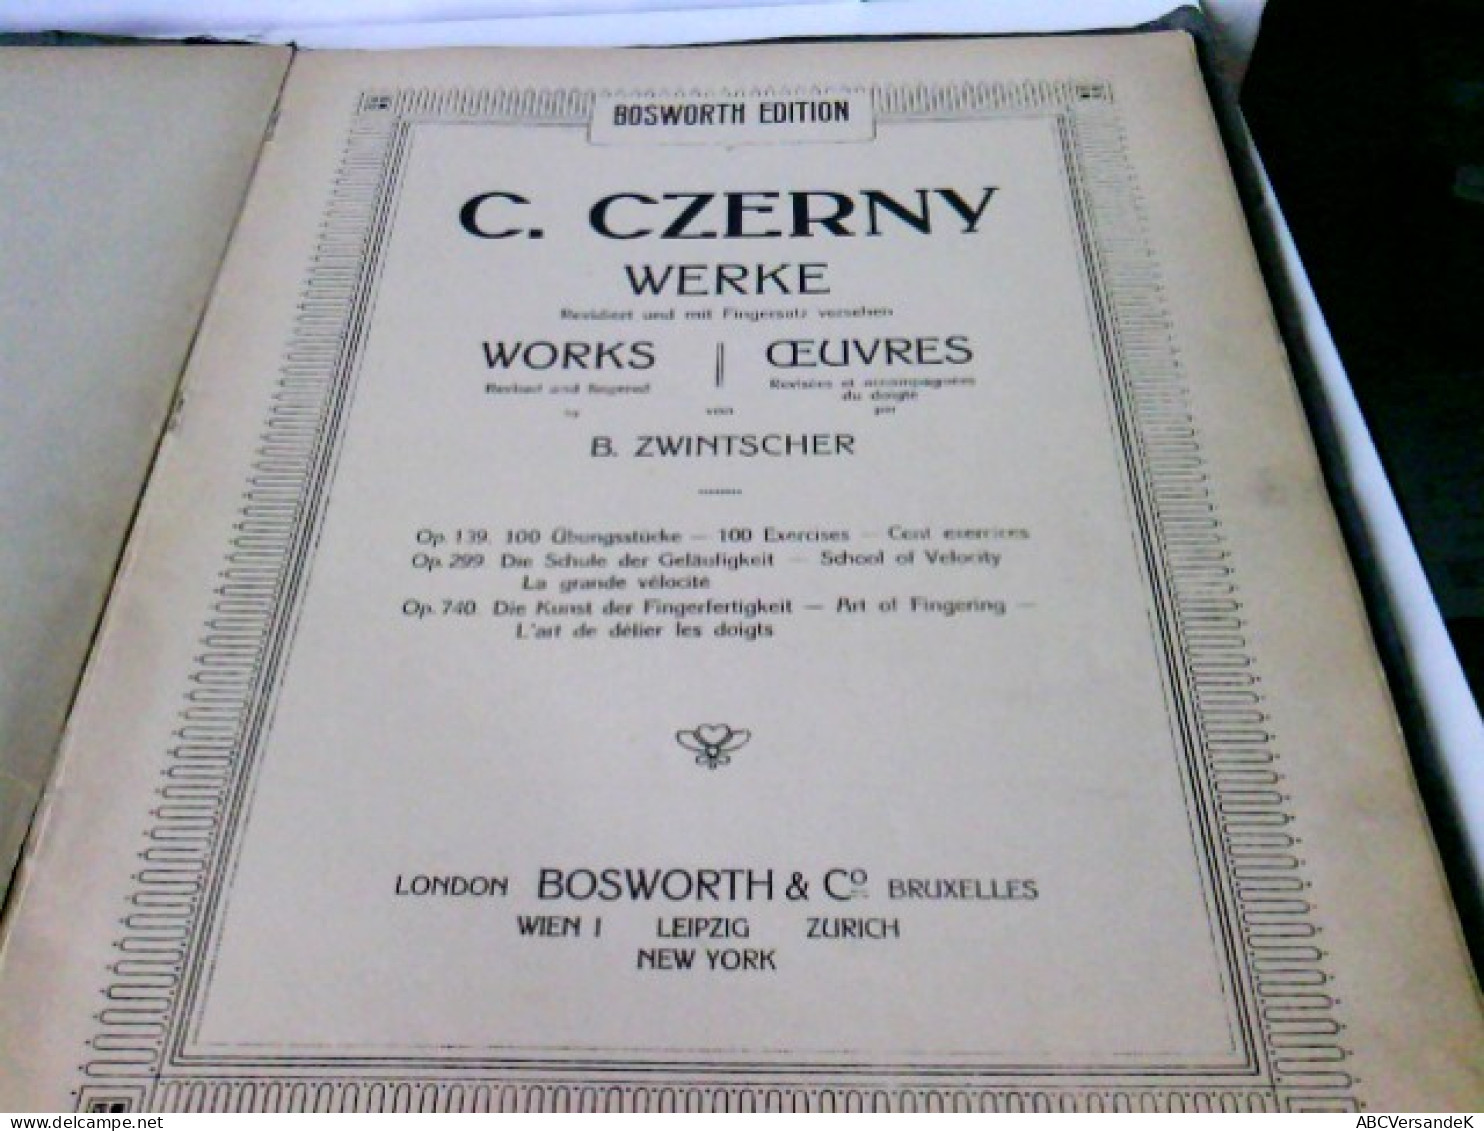 Opus 139. 100 Uebungsstücke - 100 Exercises - Cent Exercices: Bosworth Edition (B & Co. 892. 2392/3) - Music